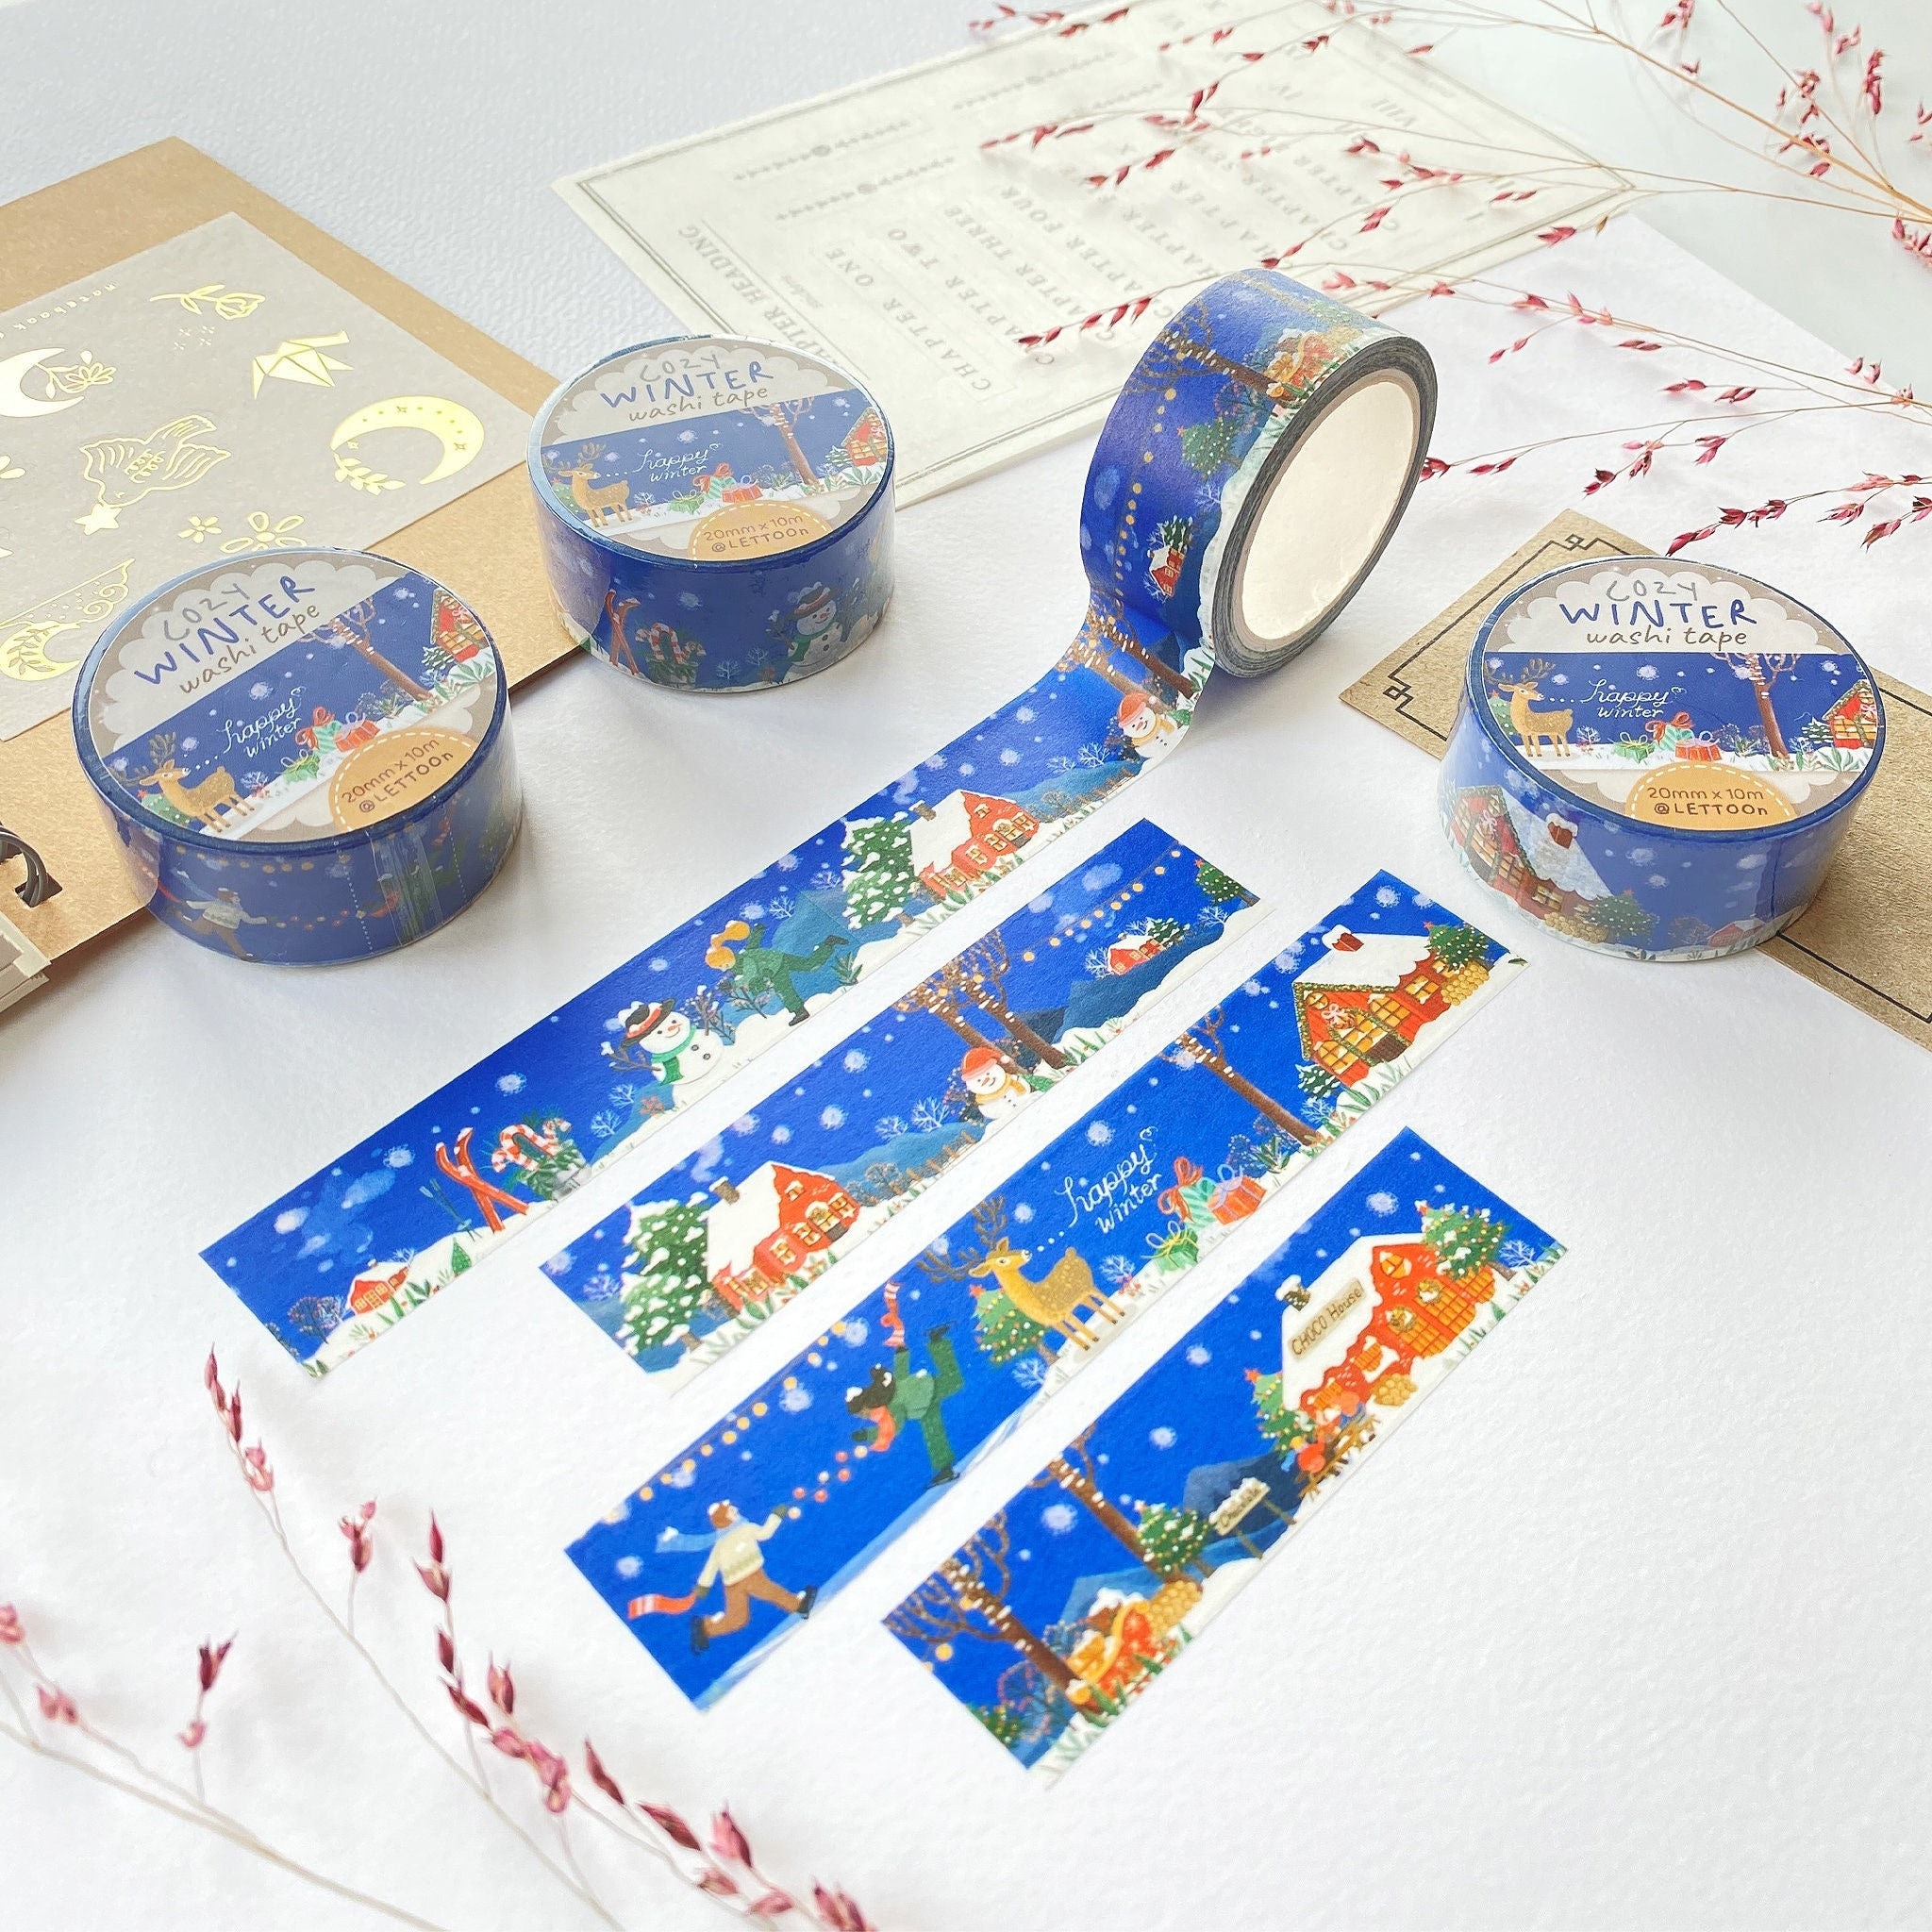 Dino Cookie Washi Tape Kawaii Washi Tape, Decorative Tape, Paper Tape,  Colorful Crafting Tape, Stationery Craft Tape, Dino Cookie Tape 